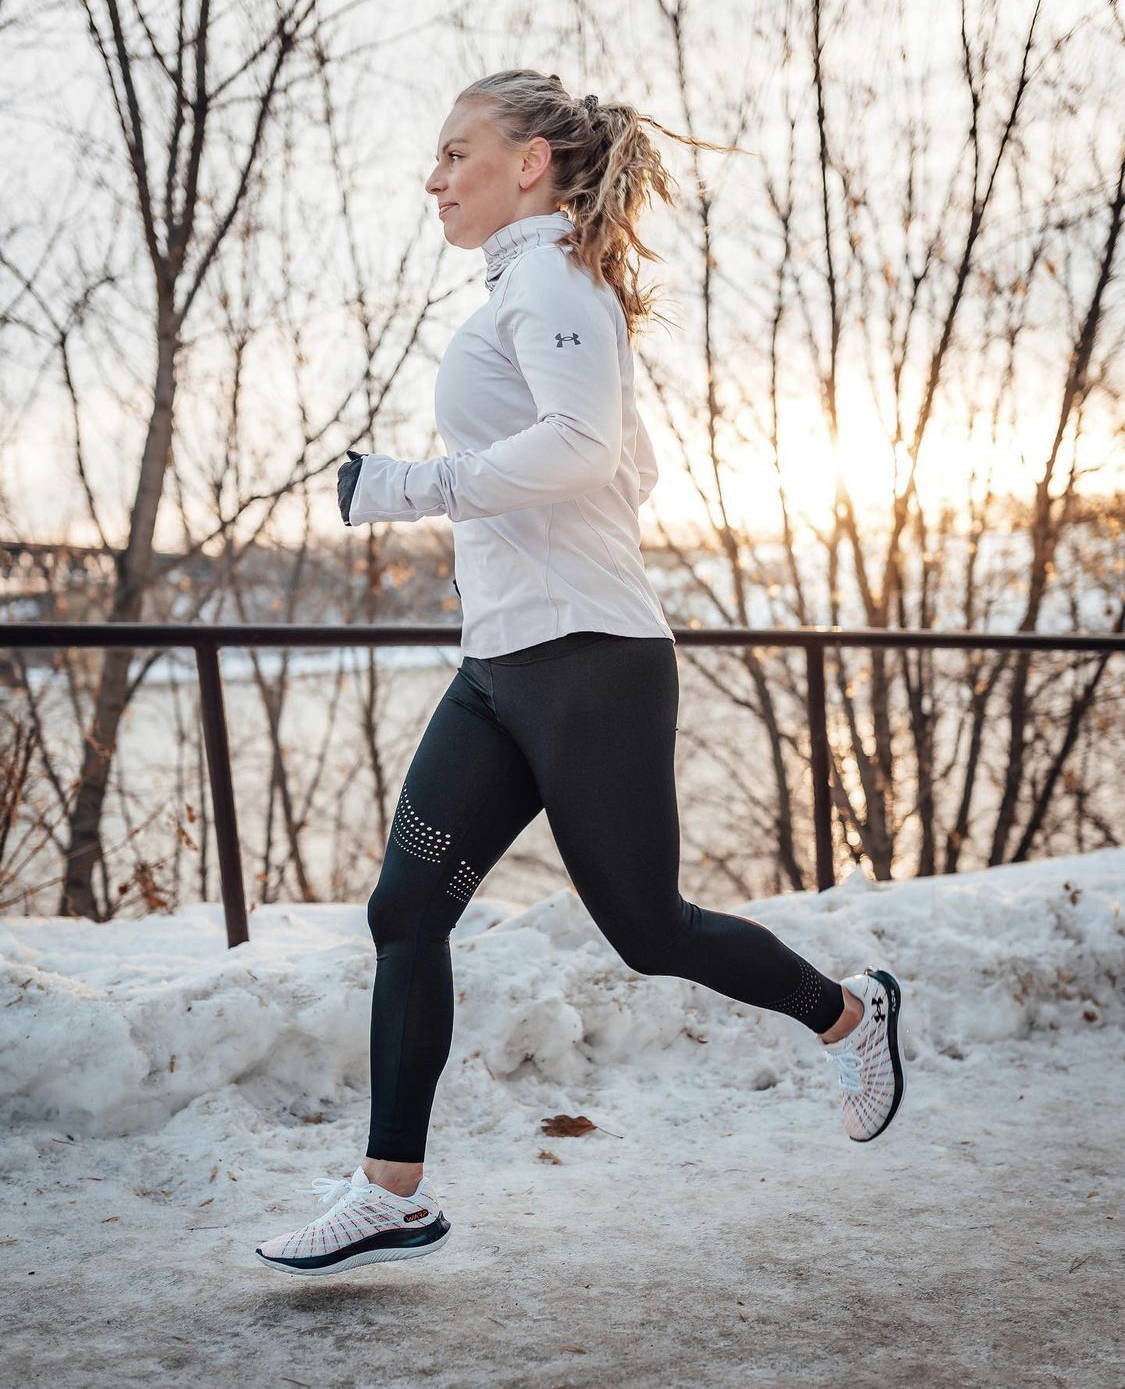 9 Tips For Running in Cold Weather From Our Favorite Running